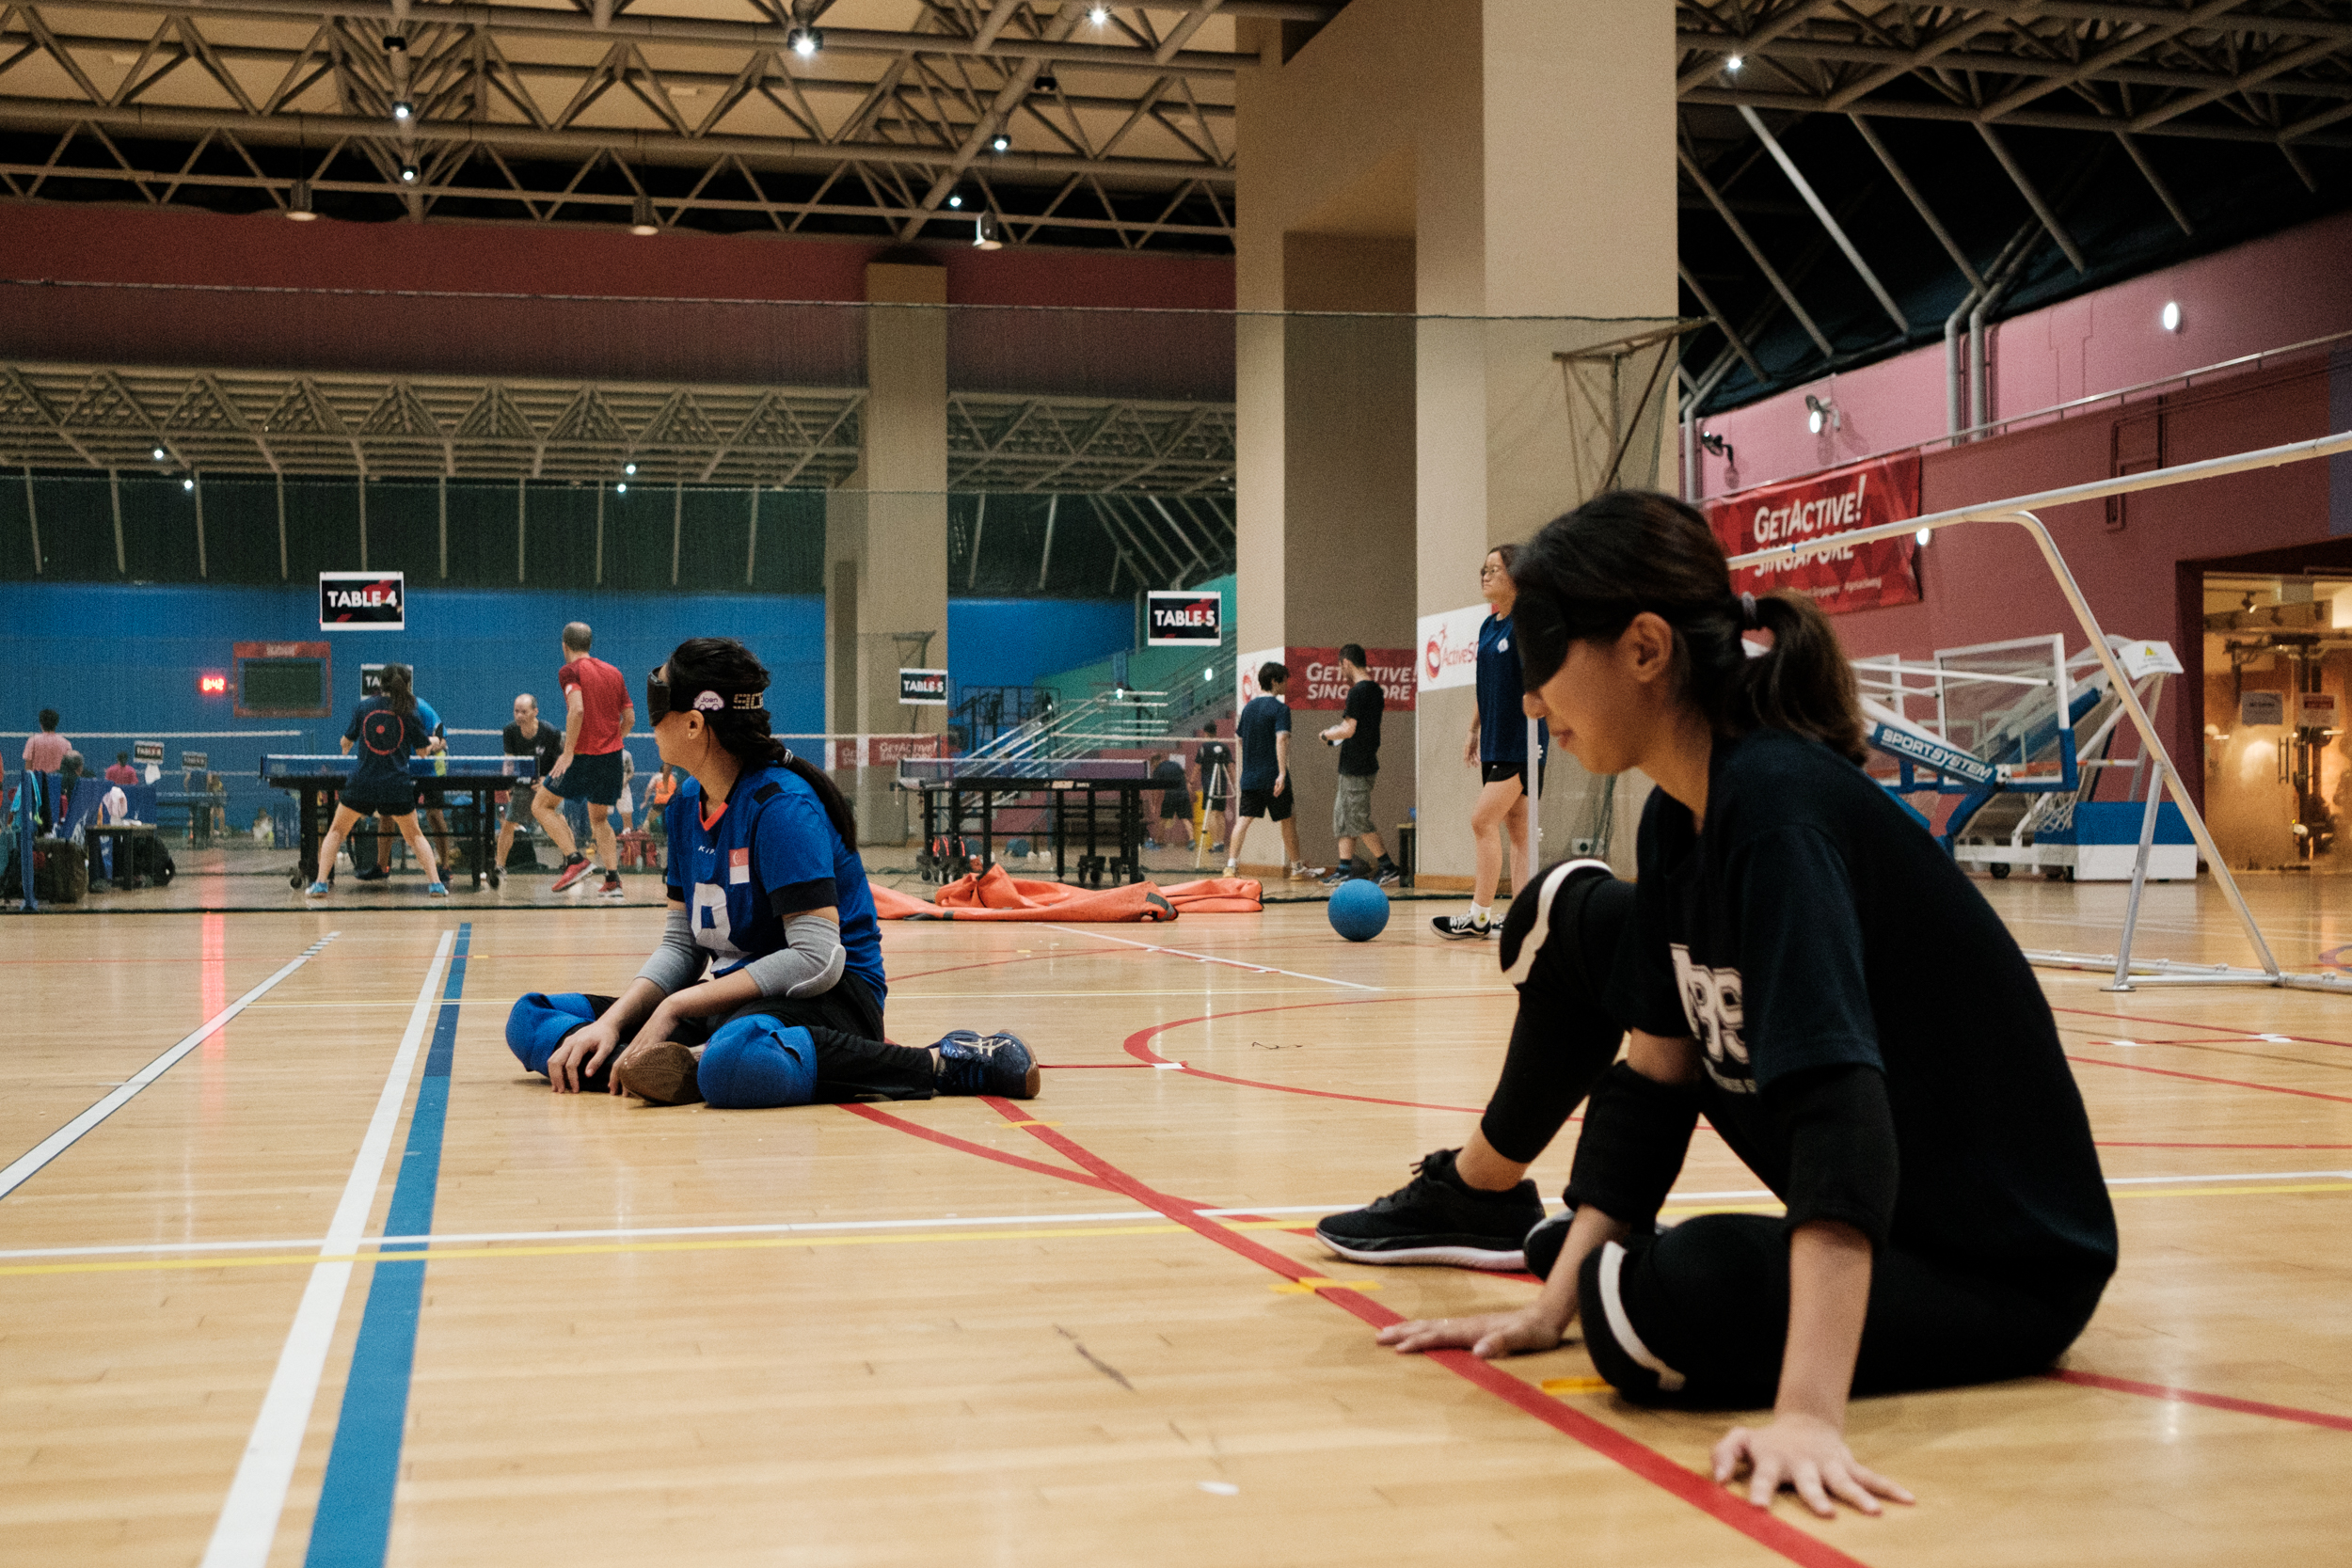 Goalball players have to defend a goal while blindfolded